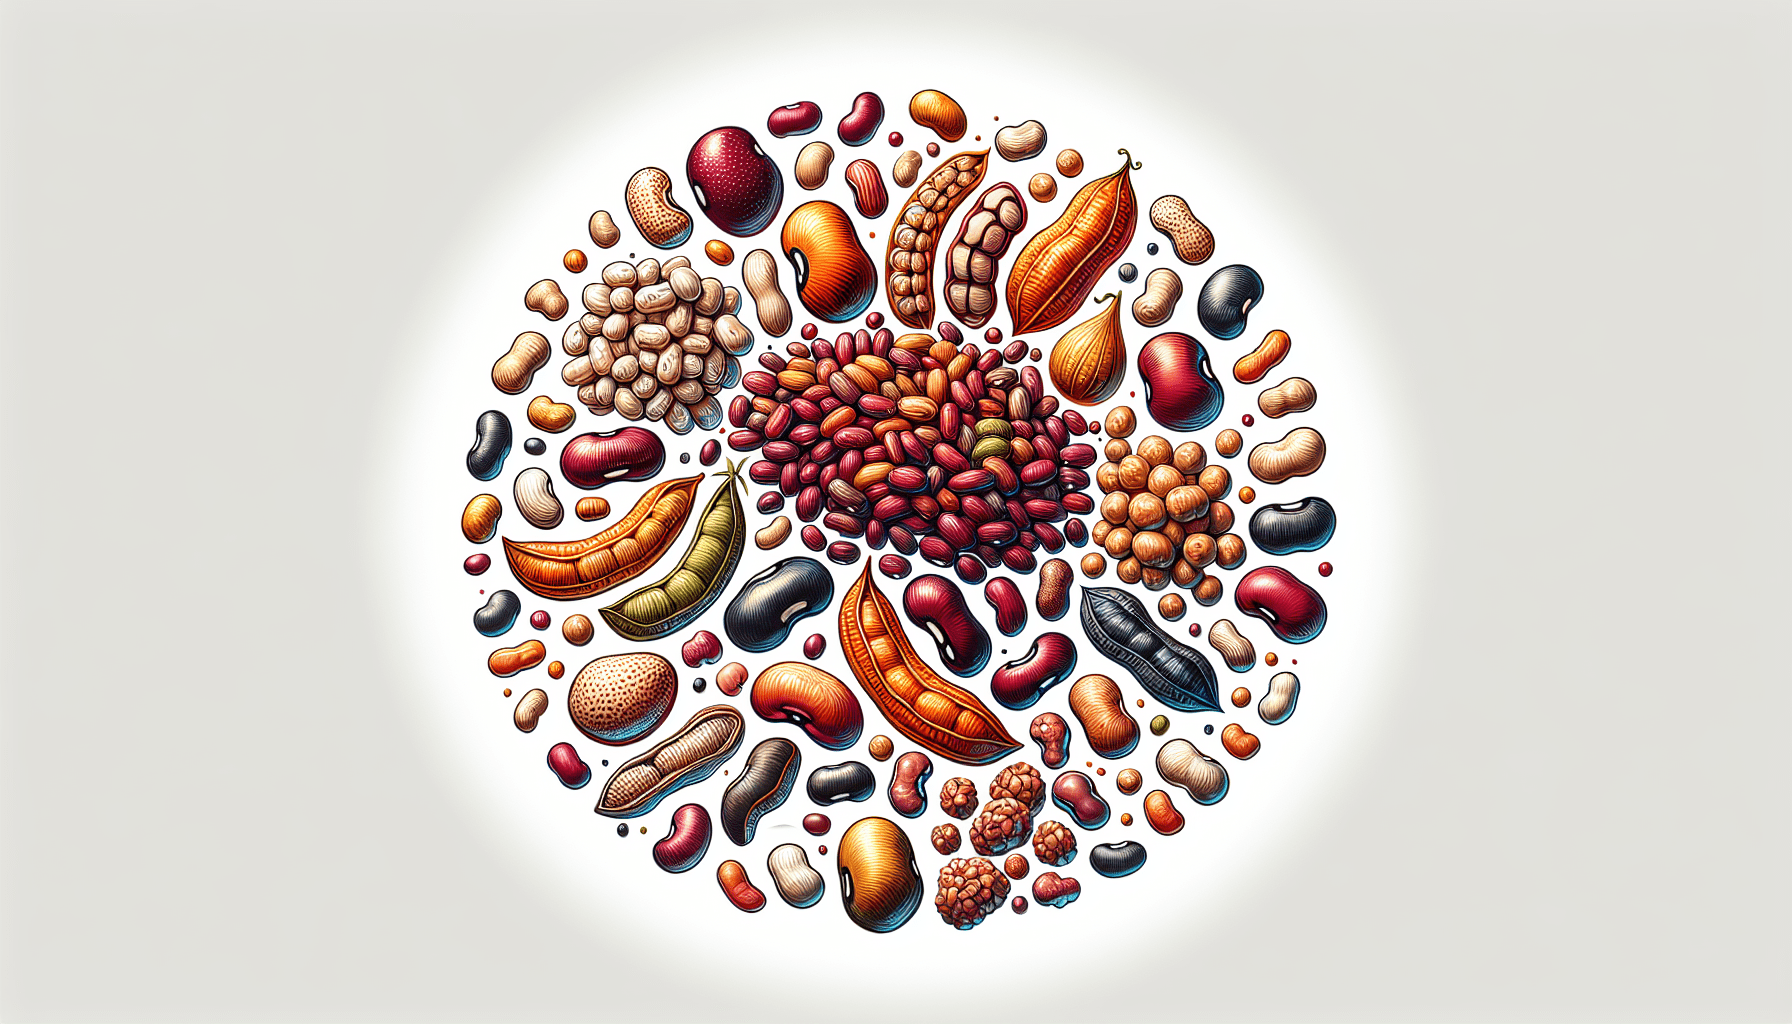 11 what vitamins and minerals are abundant in different types of beans